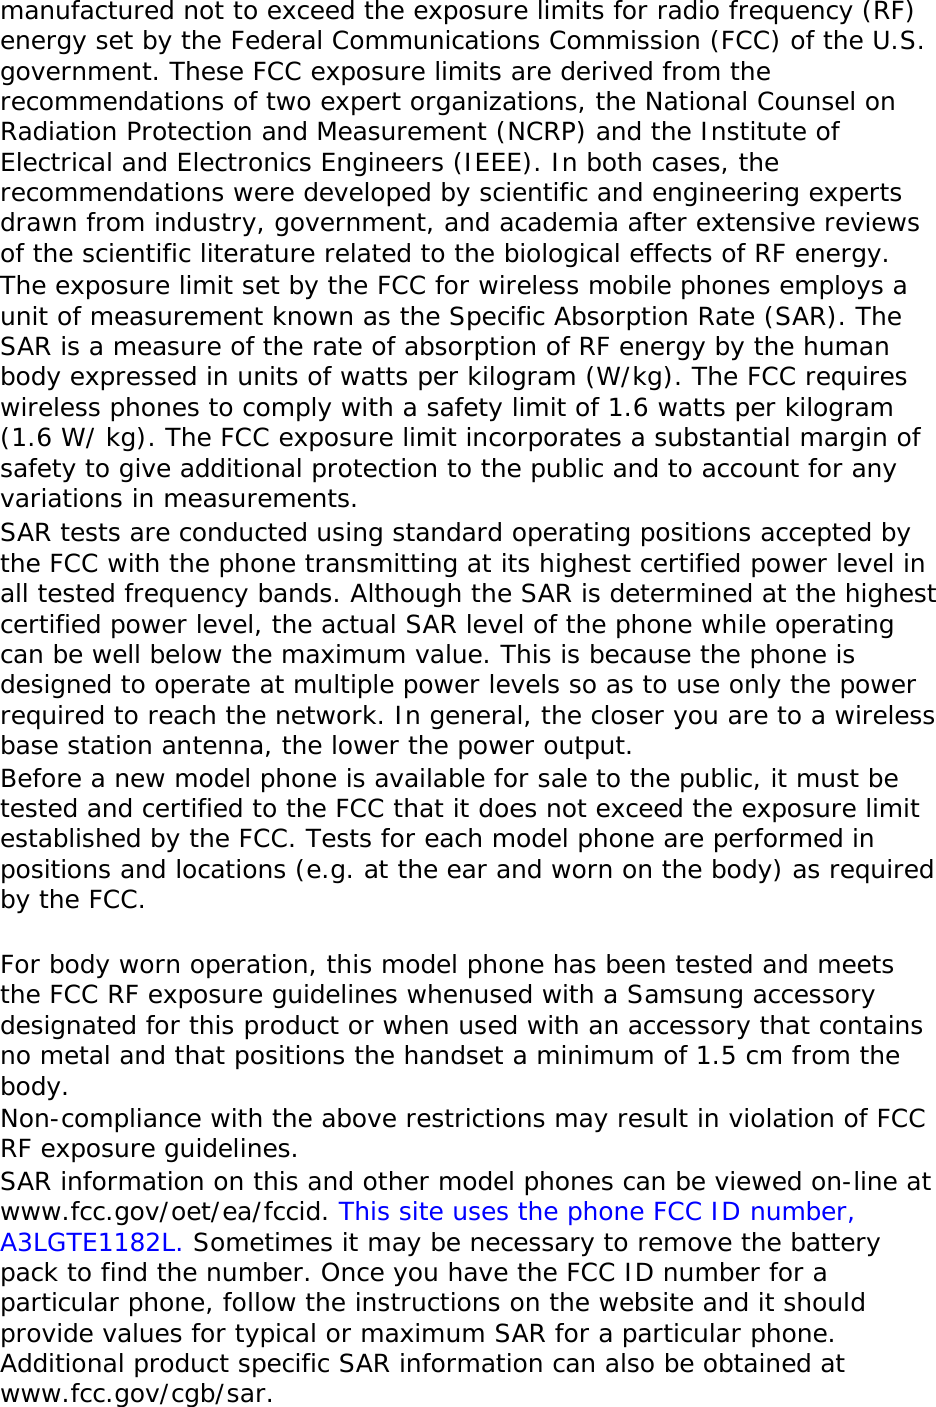 manufactured not to exceed the exposure limits for radio frequency (RF) energy set by the Federal Communications Commission (FCC) of the U.S. government. These FCC exposure limits are derived from the recommendations of two expert organizations, the National Counsel on Radiation Protection and Measurement (NCRP) and the Institute of Electrical and Electronics Engineers (IEEE). In both cases, the recommendations were developed by scientific and engineering experts drawn from industry, government, and academia after extensive reviews of the scientific literature related to the biological effects of RF energy. The exposure limit set by the FCC for wireless mobile phones employs a unit of measurement known as the Specific Absorption Rate (SAR). The SAR is a measure of the rate of absorption of RF energy by the human body expressed in units of watts per kilogram (W/kg). The FCC requires wireless phones to comply with a safety limit of 1.6 watts per kilogram (1.6 W/ kg). The FCC exposure limit incorporates a substantial margin of safety to give additional protection to the public and to account for any variations in measurements. SAR tests are conducted using standard operating positions accepted by the FCC with the phone transmitting at its highest certified power level in all tested frequency bands. Although the SAR is determined at the highest certified power level, the actual SAR level of the phone while operating can be well below the maximum value. This is because the phone is designed to operate at multiple power levels so as to use only the power required to reach the network. In general, the closer you are to a wireless base station antenna, the lower the power output. Before a new model phone is available for sale to the public, it must be tested and certified to the FCC that it does not exceed the exposure limit established by the FCC. Tests for each model phone are performed in positions and locations (e.g. at the ear and worn on the body) as required by the FCC.    For body worn operation, this model phone has been tested and meets the FCC RF exposure guidelines whenused with a Samsung accessory designated for this product or when used with an accessory that contains no metal and that positions the handset a minimum of 1.5 cm from the body.  Non-compliance with the above restrictions may result in violation of FCC RF exposure guidelines. SAR information on this and other model phones can be viewed on-line at www.fcc.gov/oet/ea/fccid. This site uses the phone FCC ID number, A3LGTE1182L. Sometimes it may be necessary to remove the battery pack to find the number. Once you have the FCC ID number for a particular phone, follow the instructions on the website and it should provide values for typical or maximum SAR for a particular phone. Additional product specific SAR information can also be obtained at www.fcc.gov/cgb/sar. 